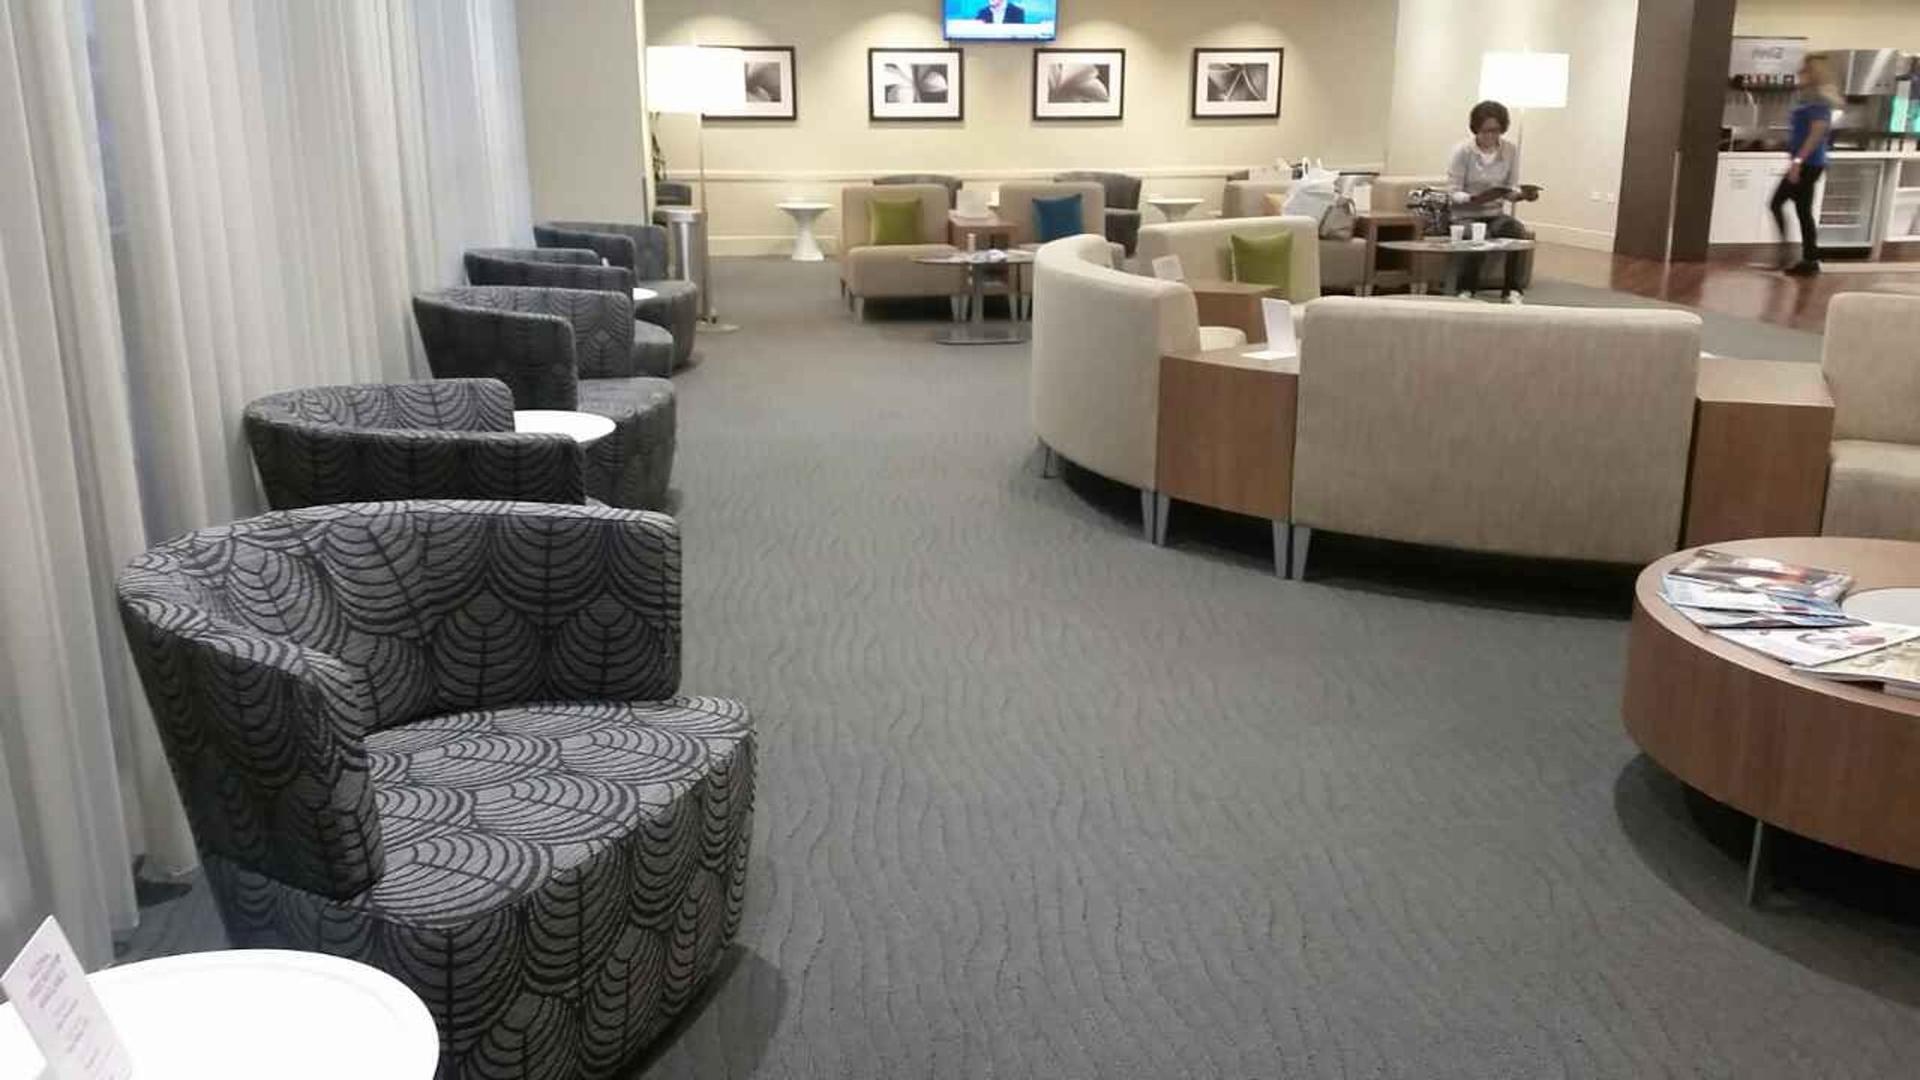 Hawaiian Airlines The Plumeria Lounge image 23 of 41